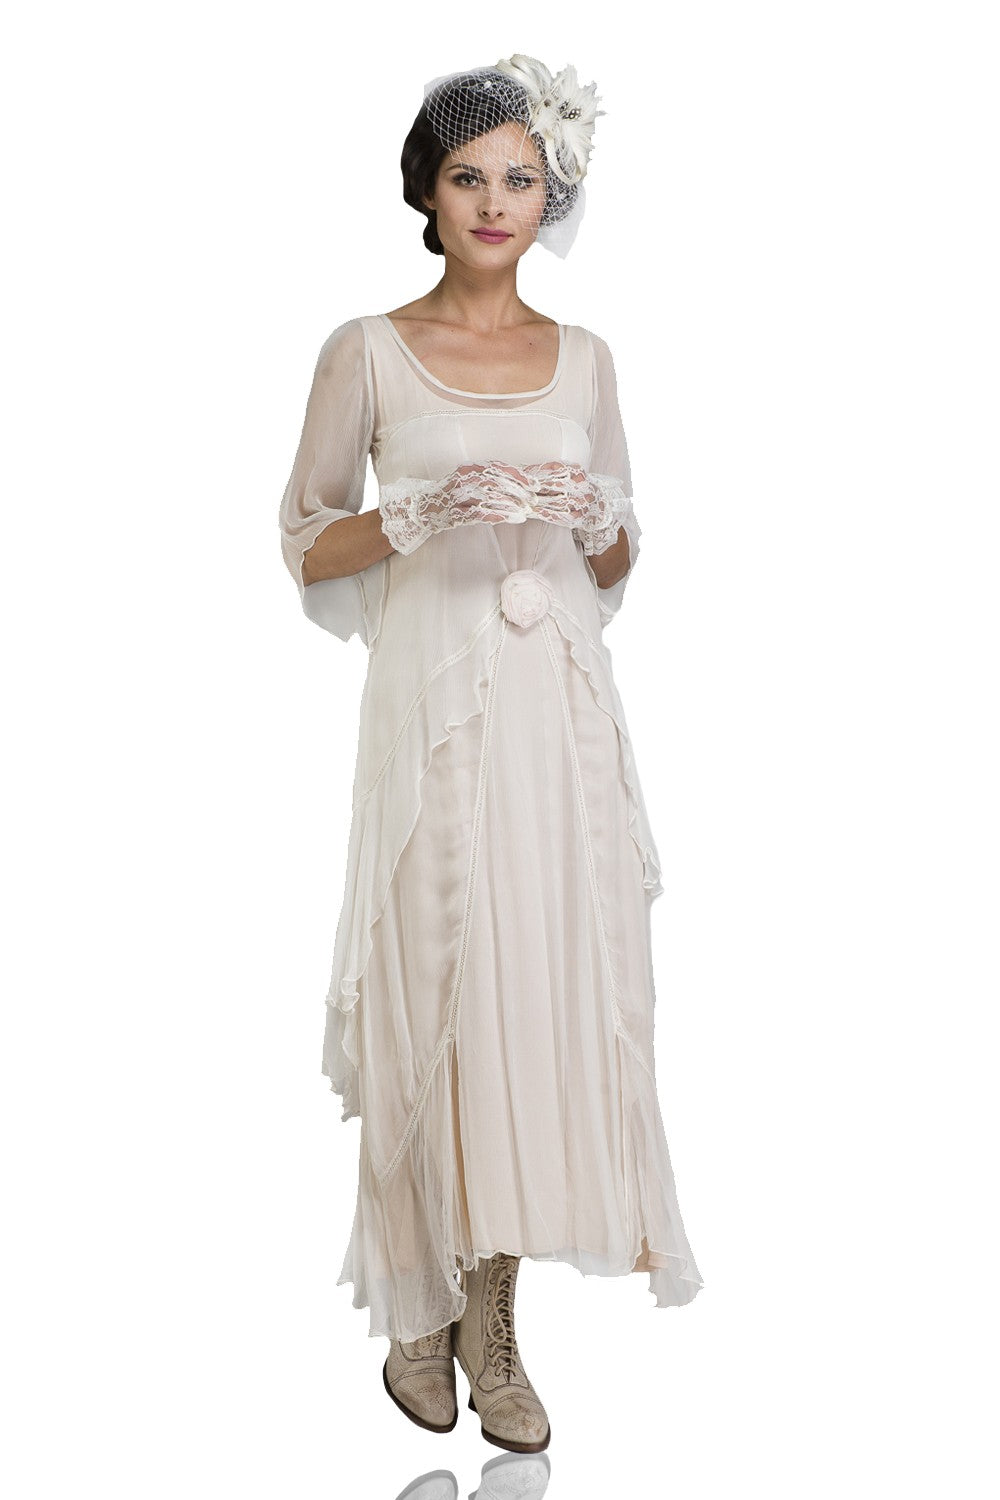 1920s Style Dresses, 1920s Dress Fashions You Will Love Great Gatsby Party Dress in Ivory by Nataya $249.00 AT vintagedancer.com